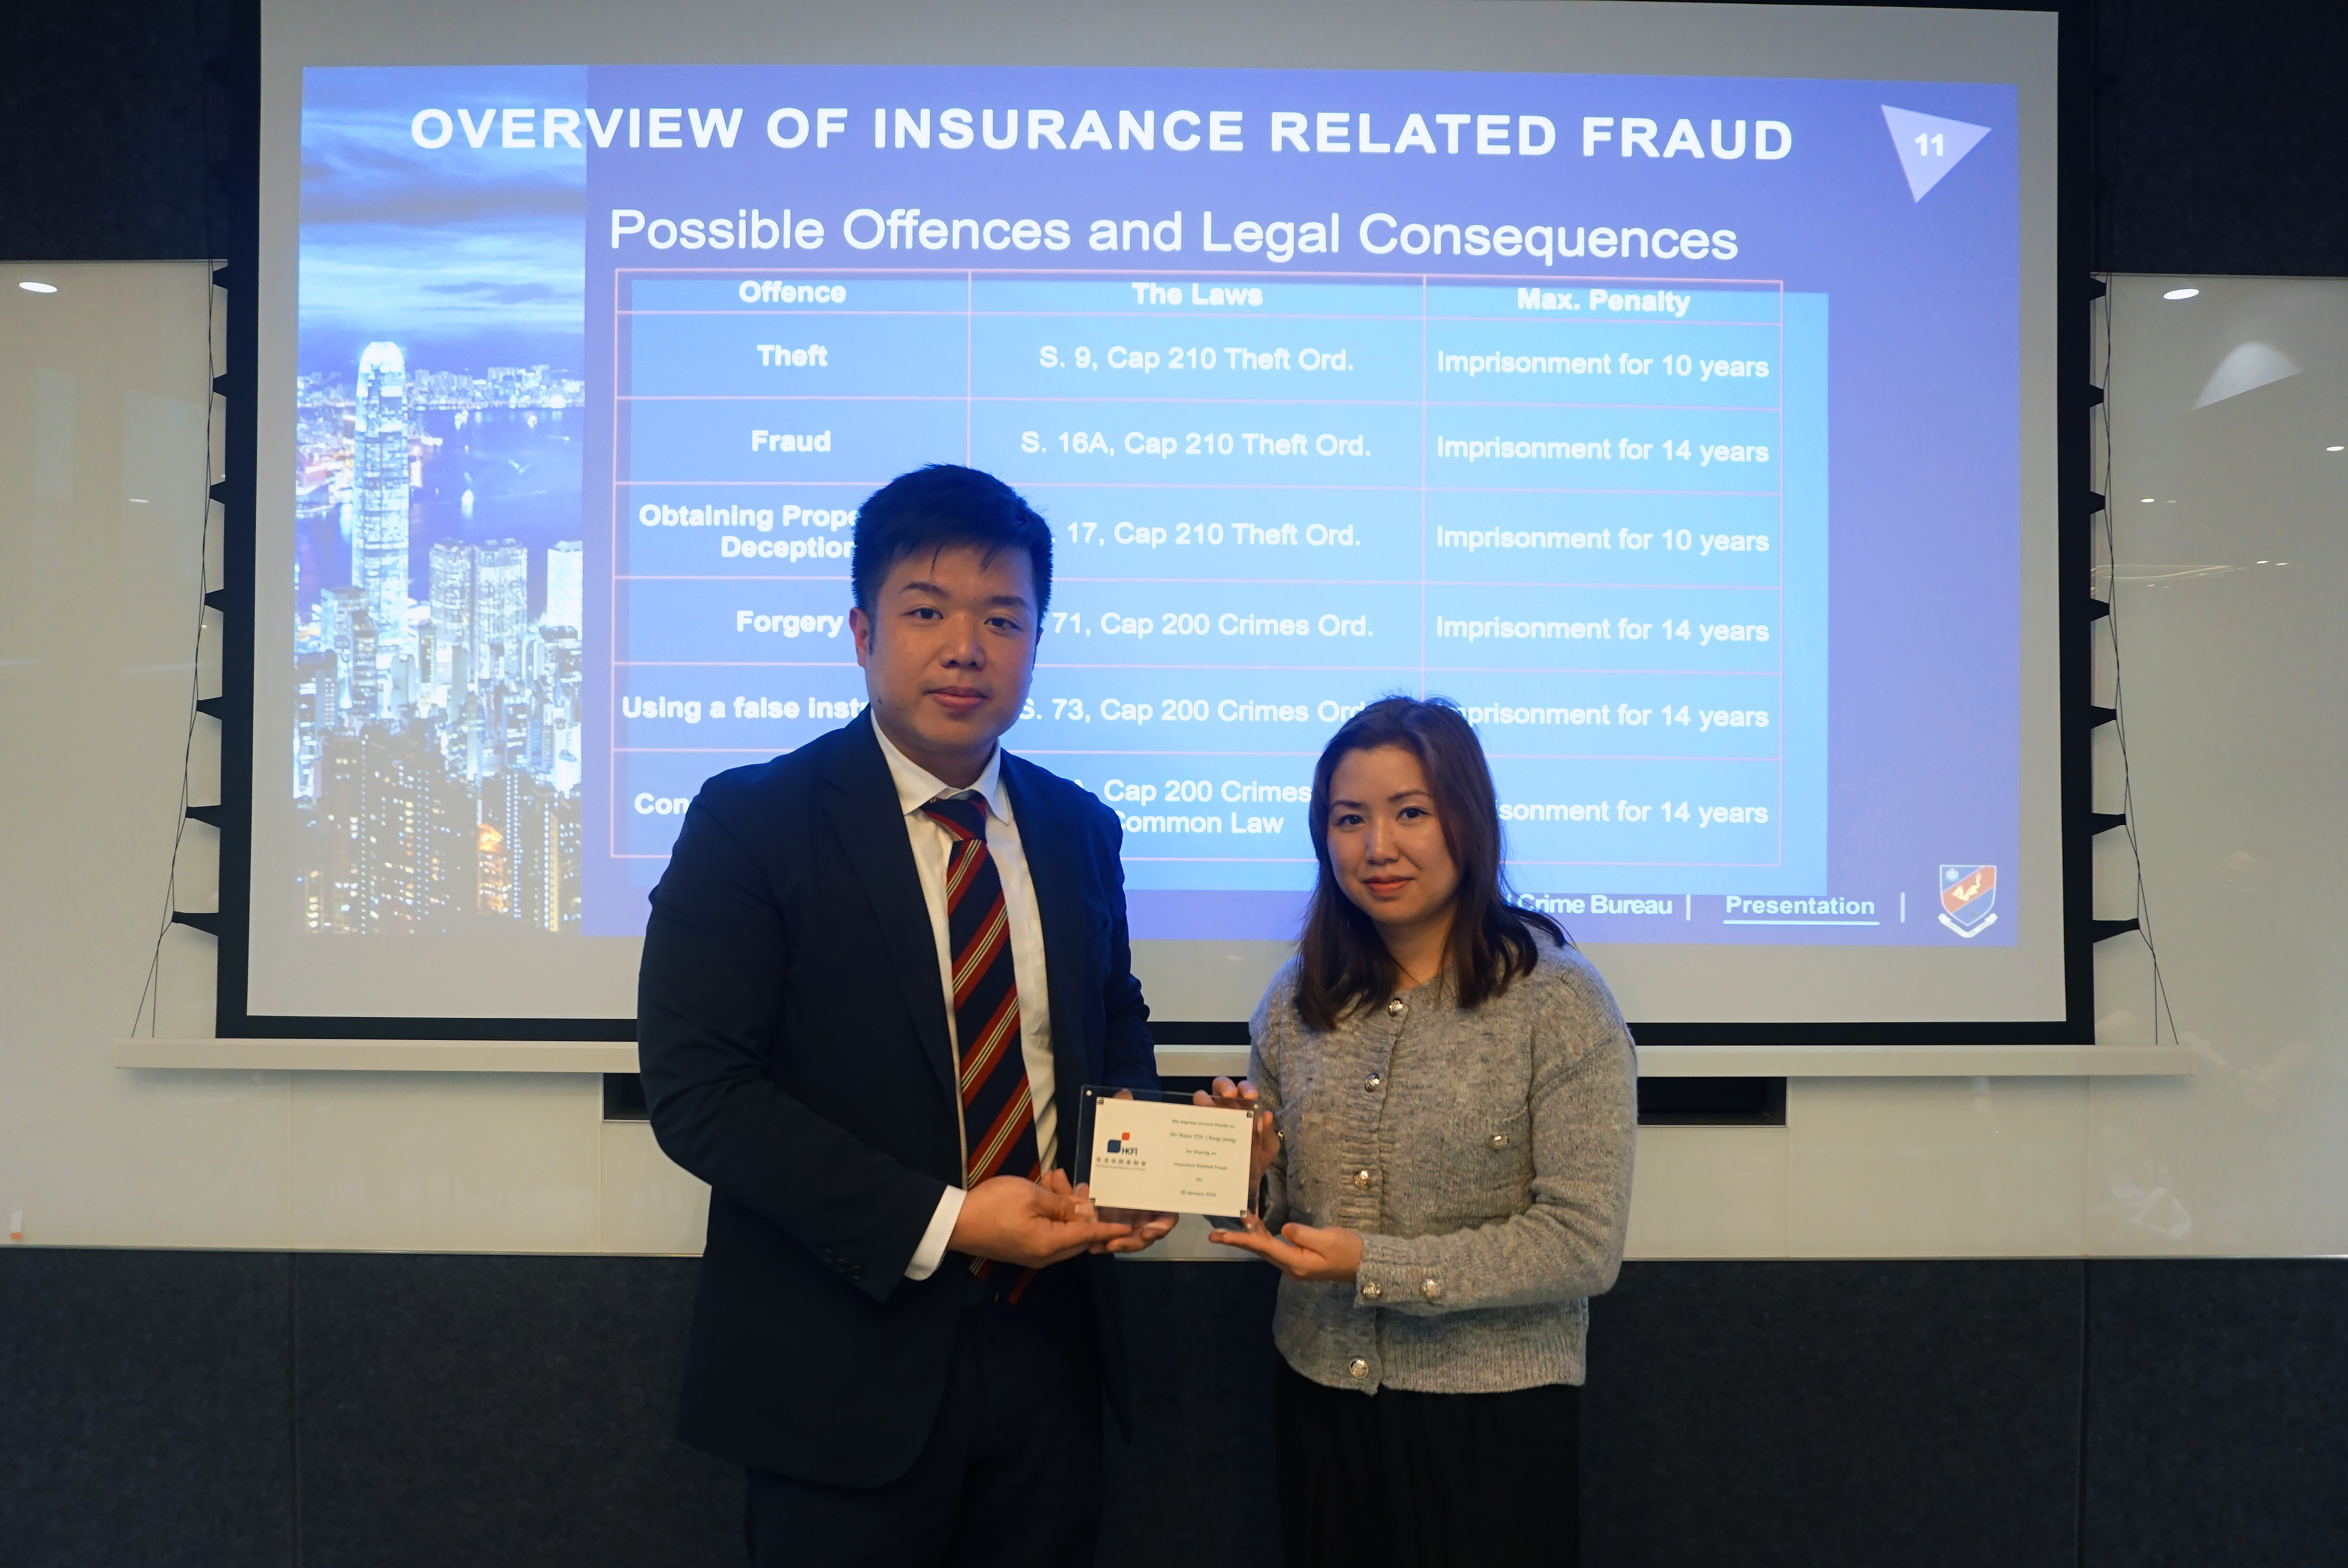 Sharing on Insurance Related Fraud by Commercial Crime Bureau